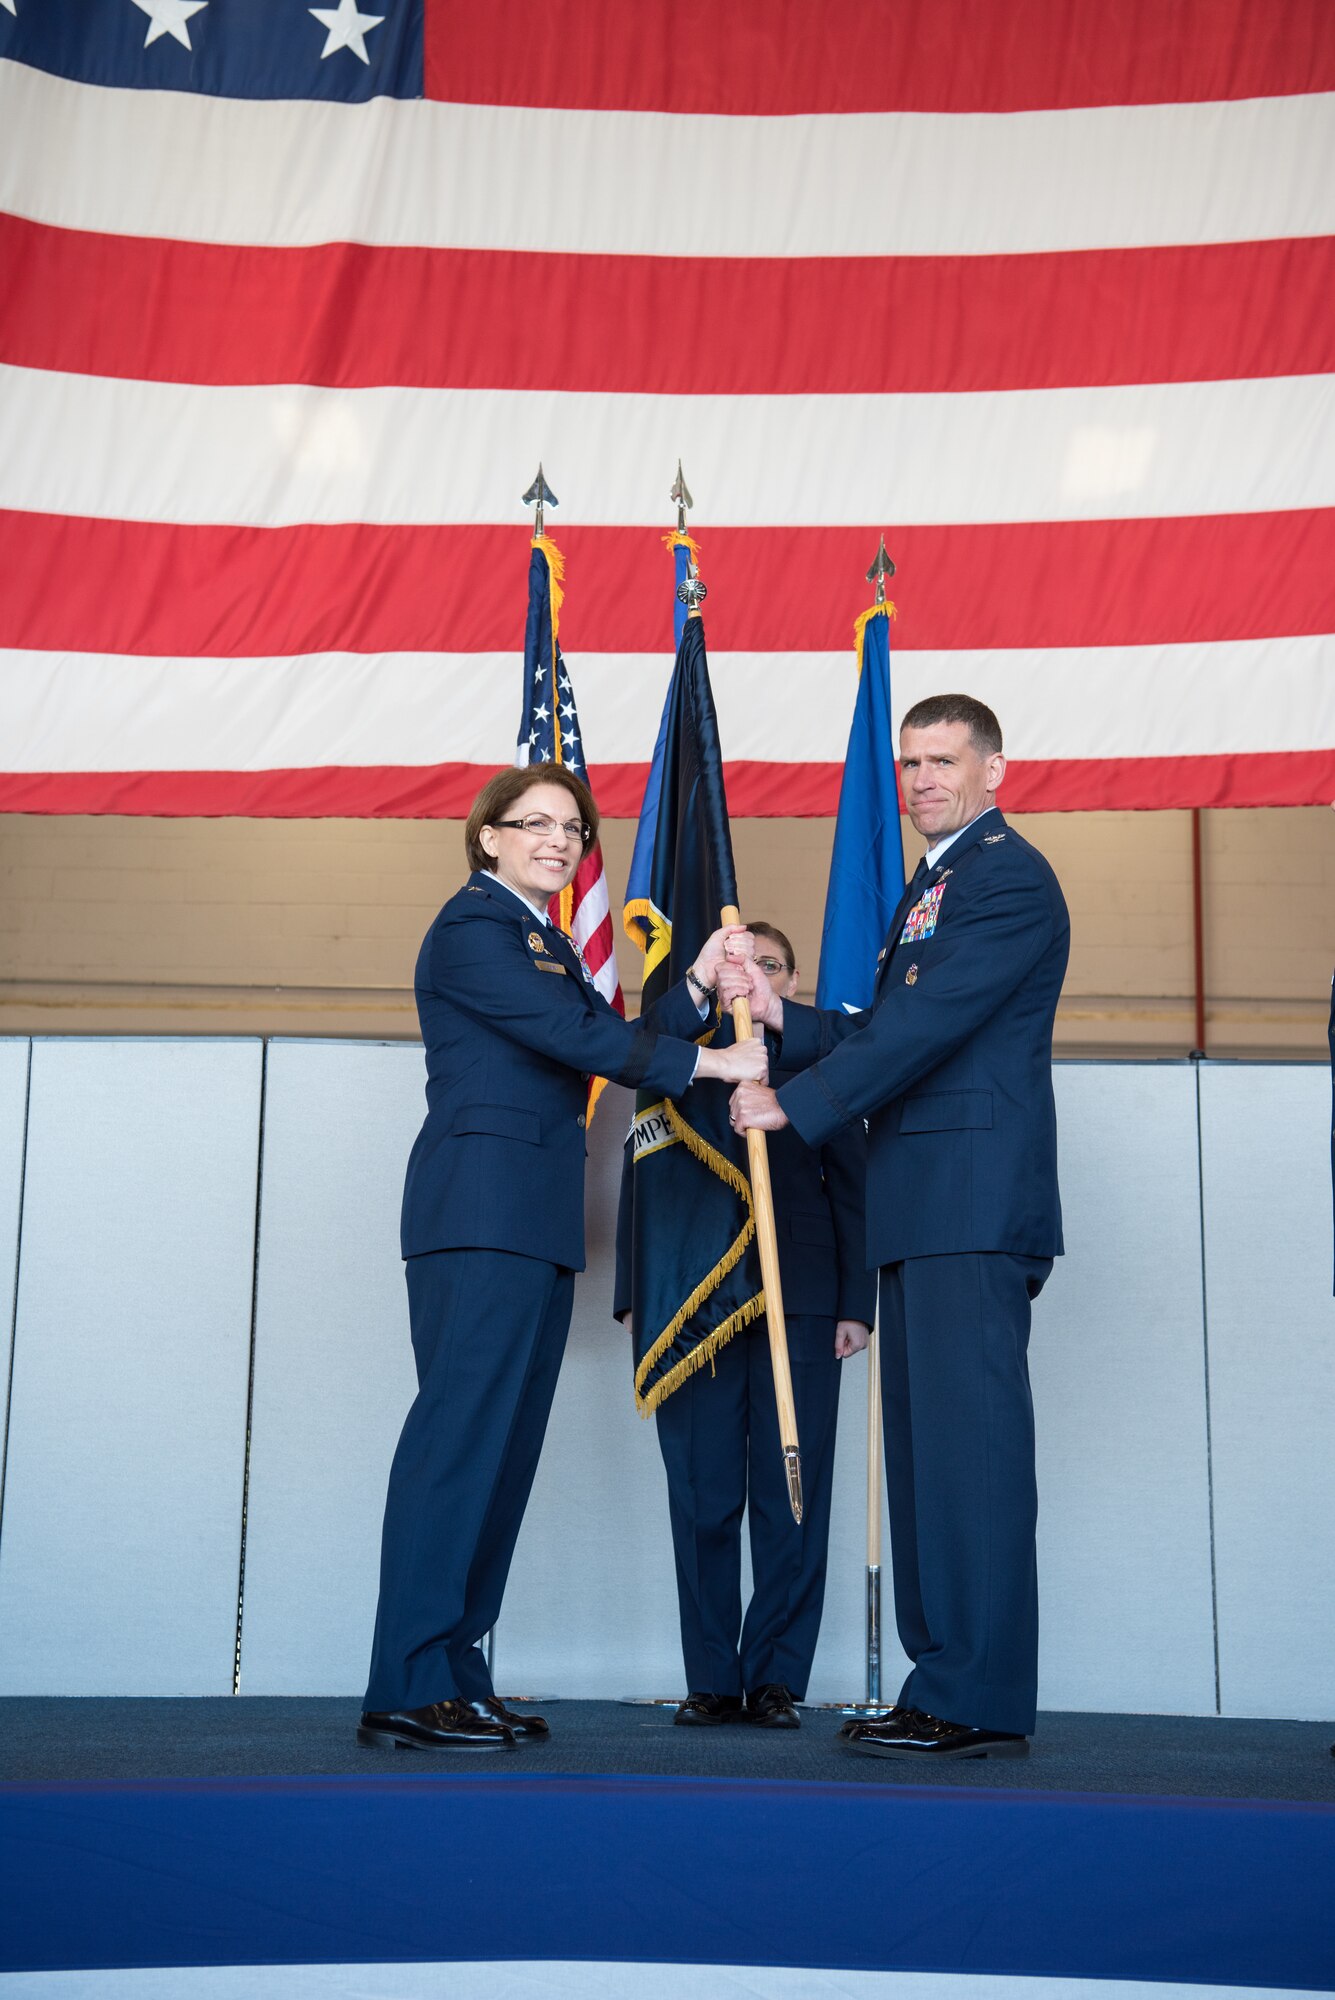 Maj. Gen. Mary O'Brien, 25th Air Force commander, hands the guidon to Col. Andrew Clark, 9th Reconnaissance Wing commander at Beale Air Force Base, California, April 13, 2018. Col. Clark took over command after previously holding the position of vice commander for the 9th RW.